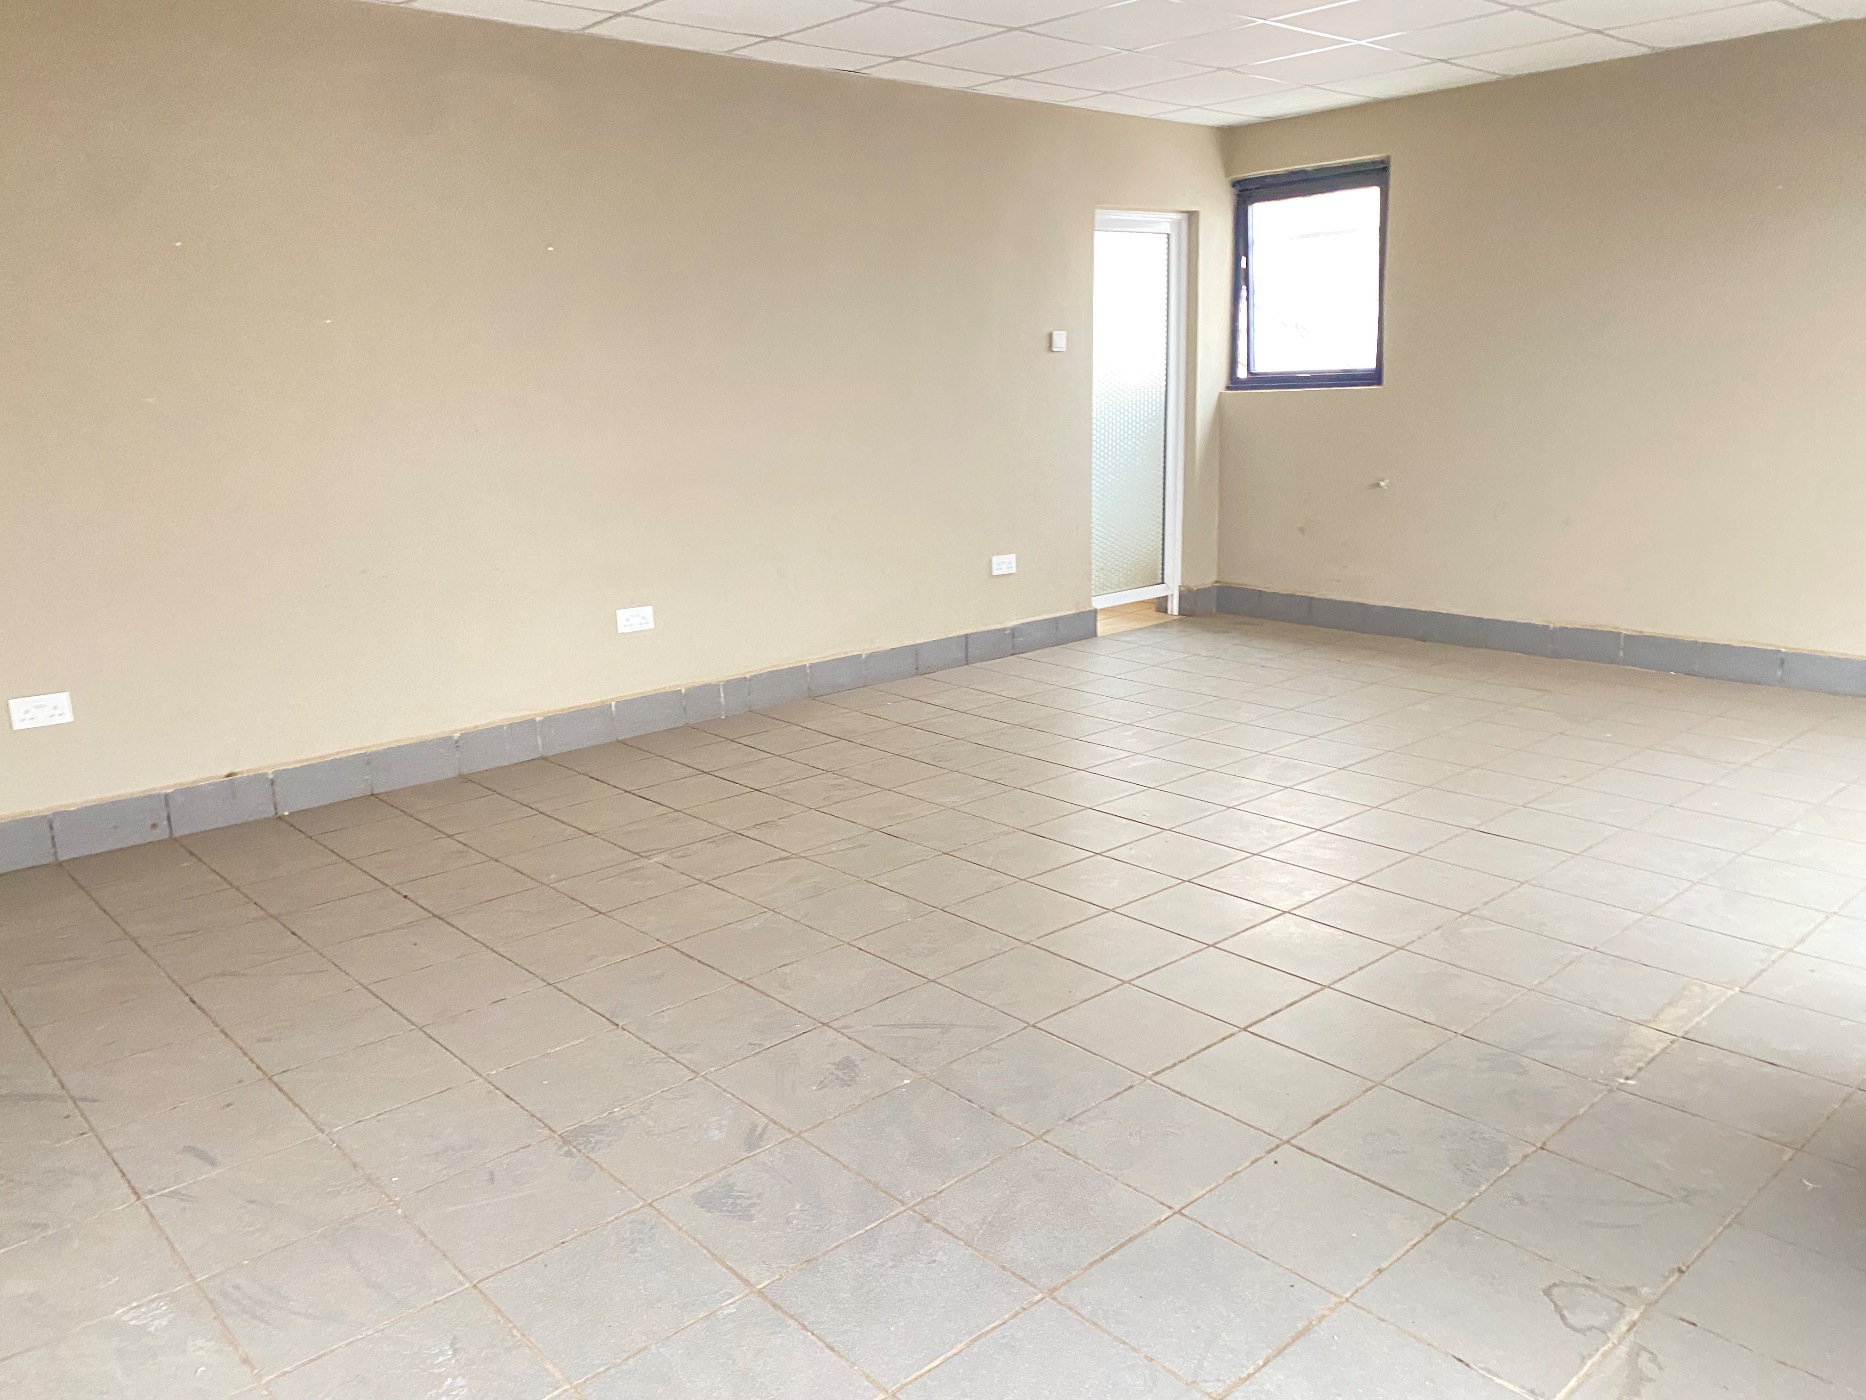 83 m&sup2; commercial retail property to rent in Kilimani (Kenya)